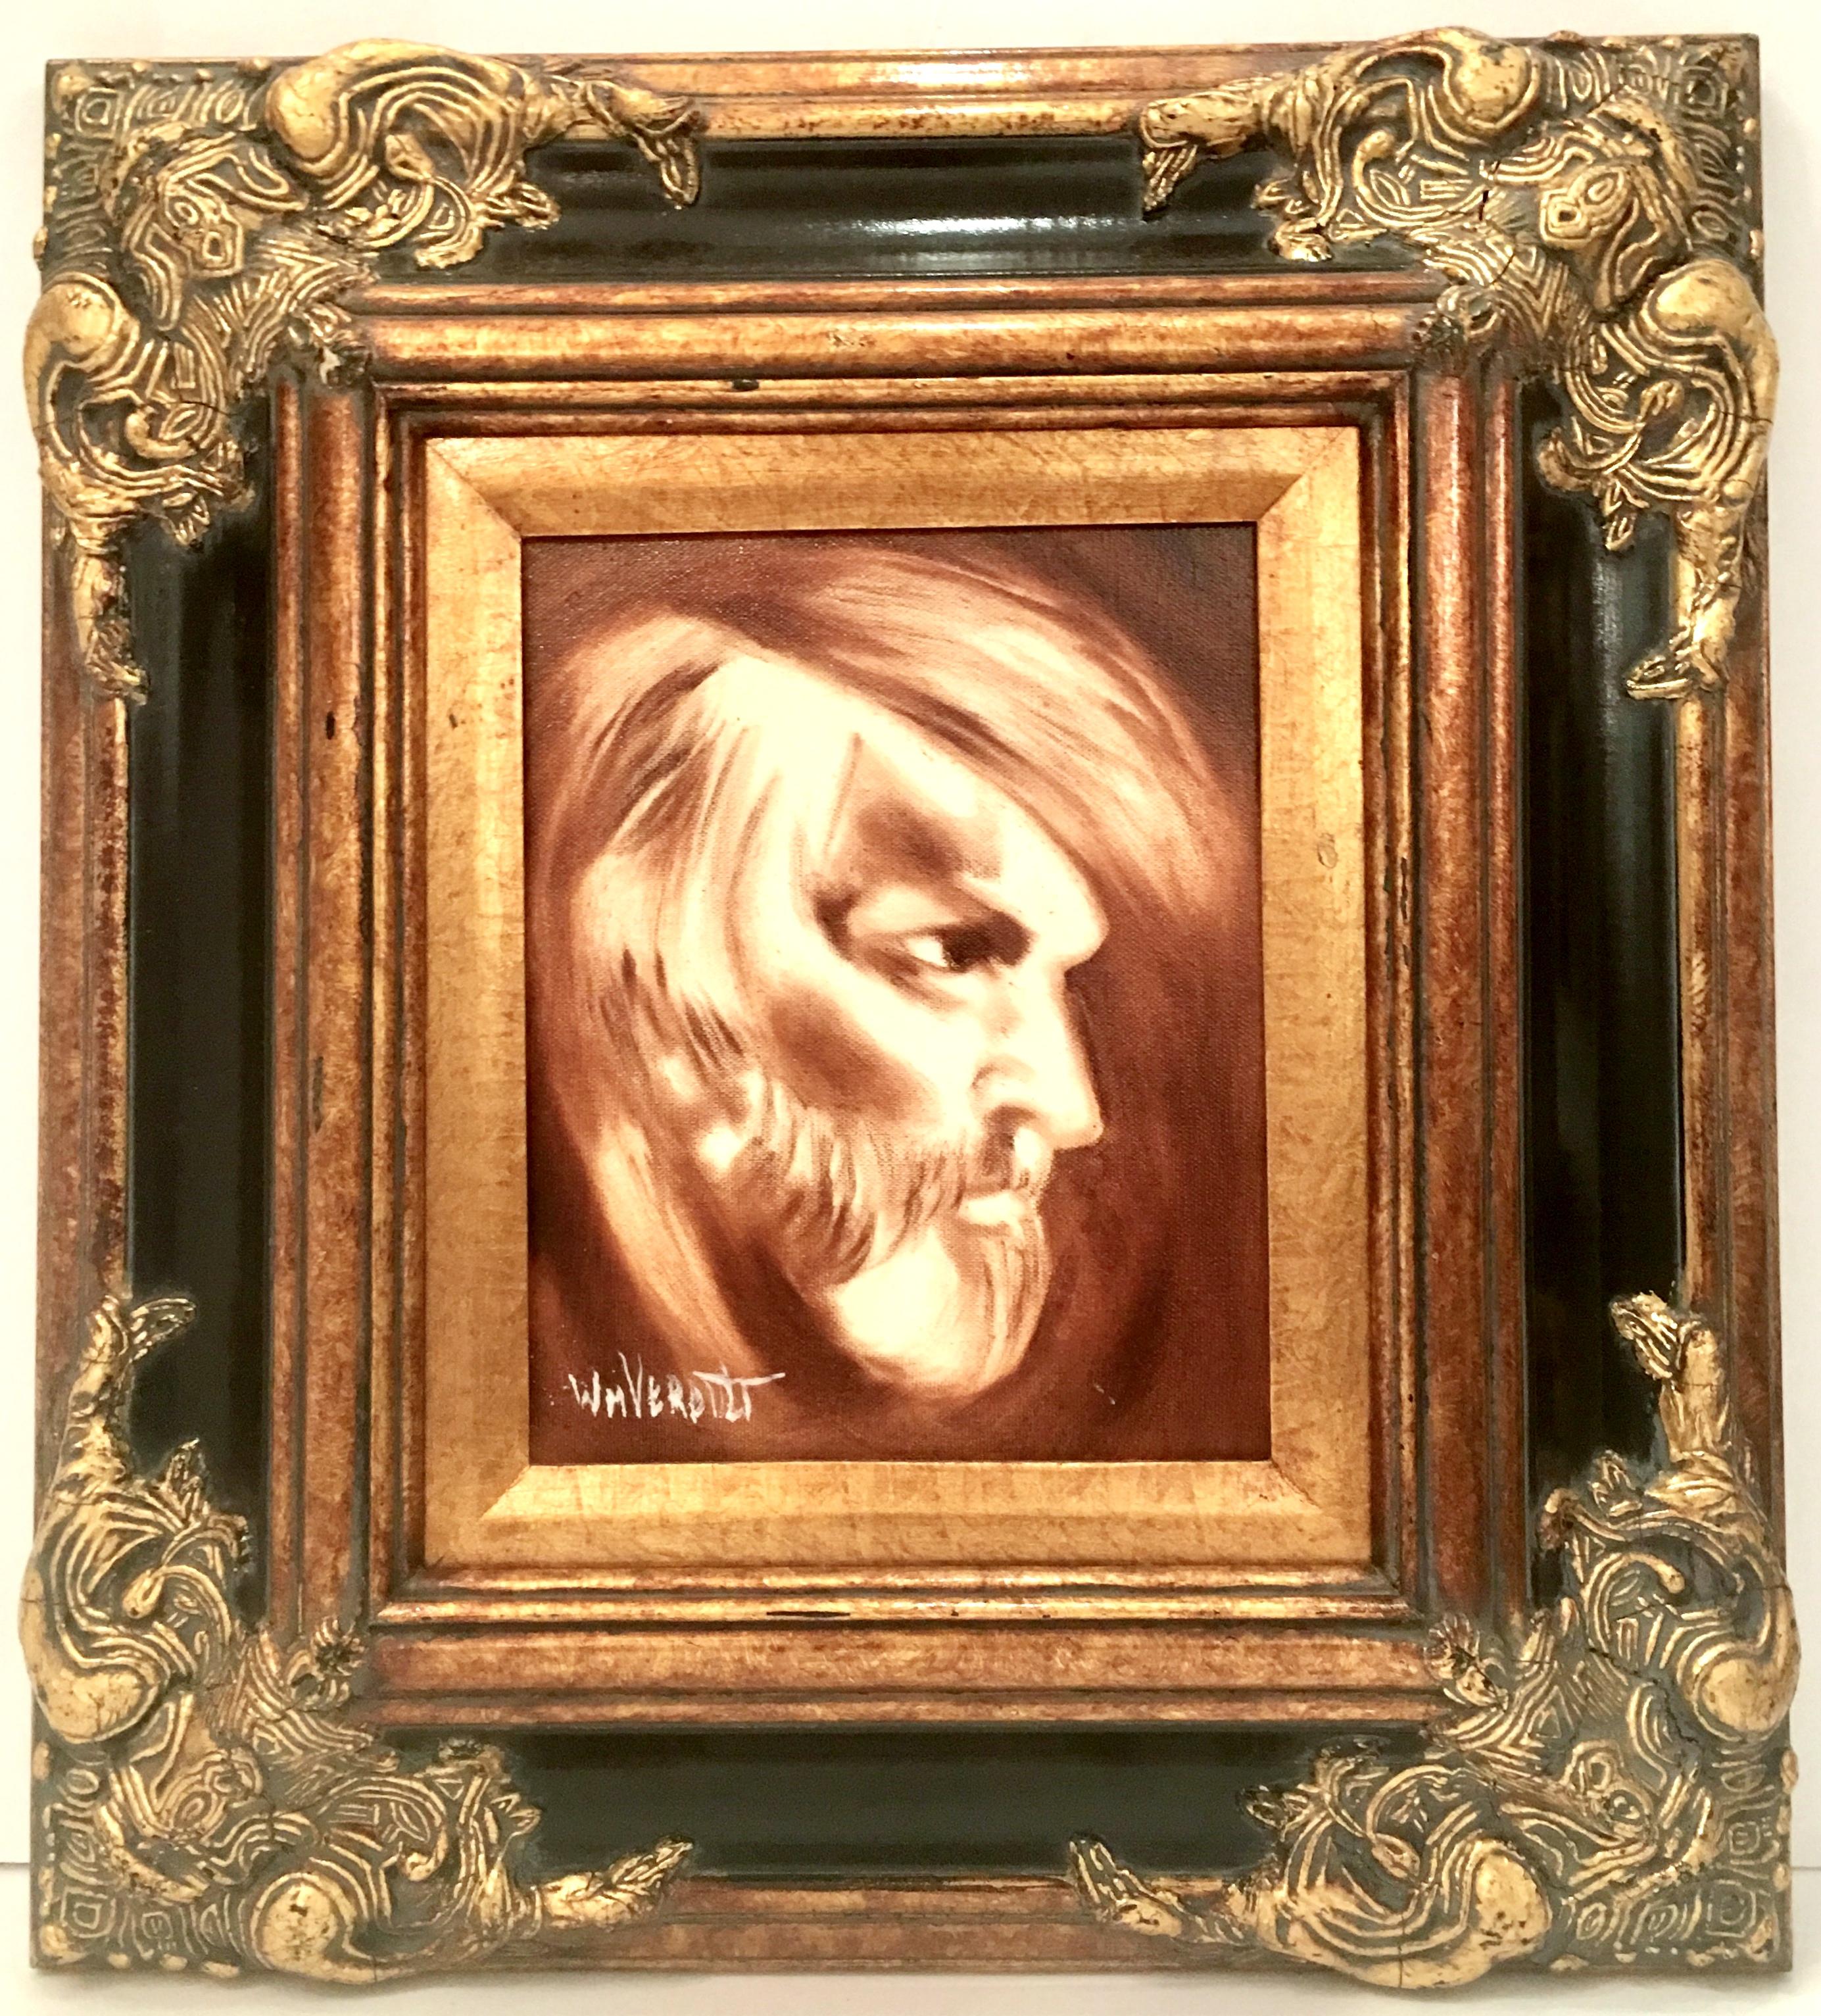 20th Century Original Oil On Canvas painting by, William Verdult. Untitled Bearded Male Portrait, features a monochromatic palette. Framed in a hand-carved gilt wood gold and black frame. Untitled bearded male portrait by, William J. Verdult, signed